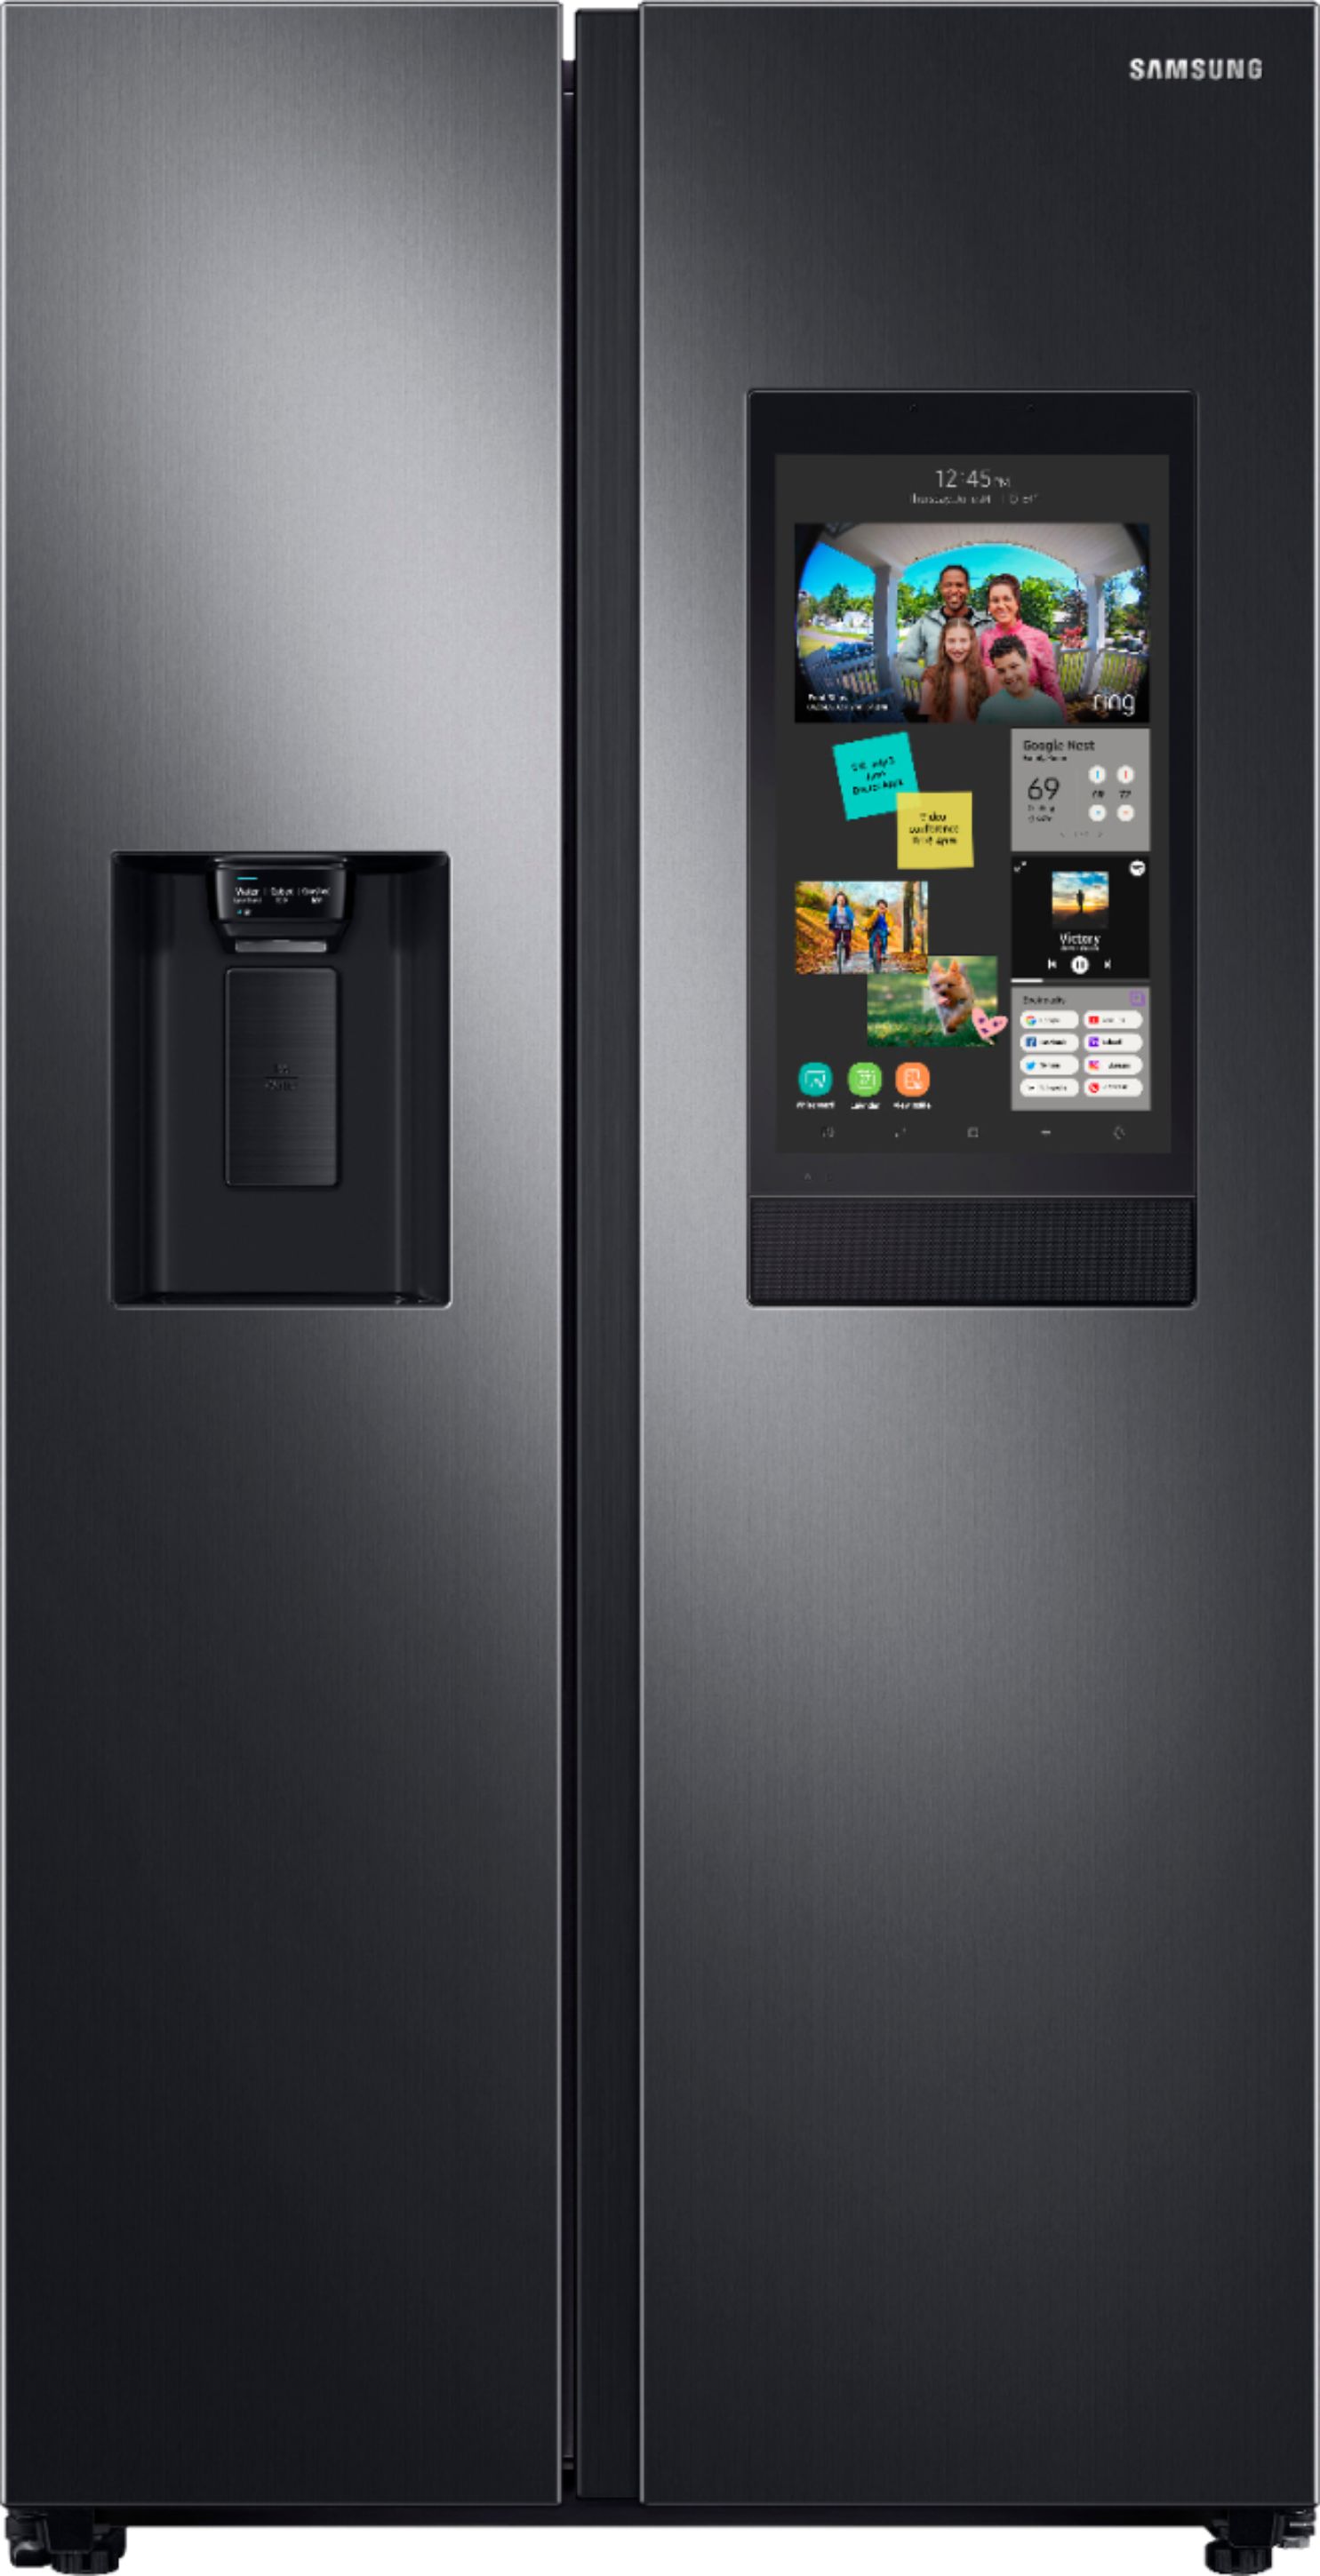 Look What's On My New Refrigerator Samsung Family Hub Review